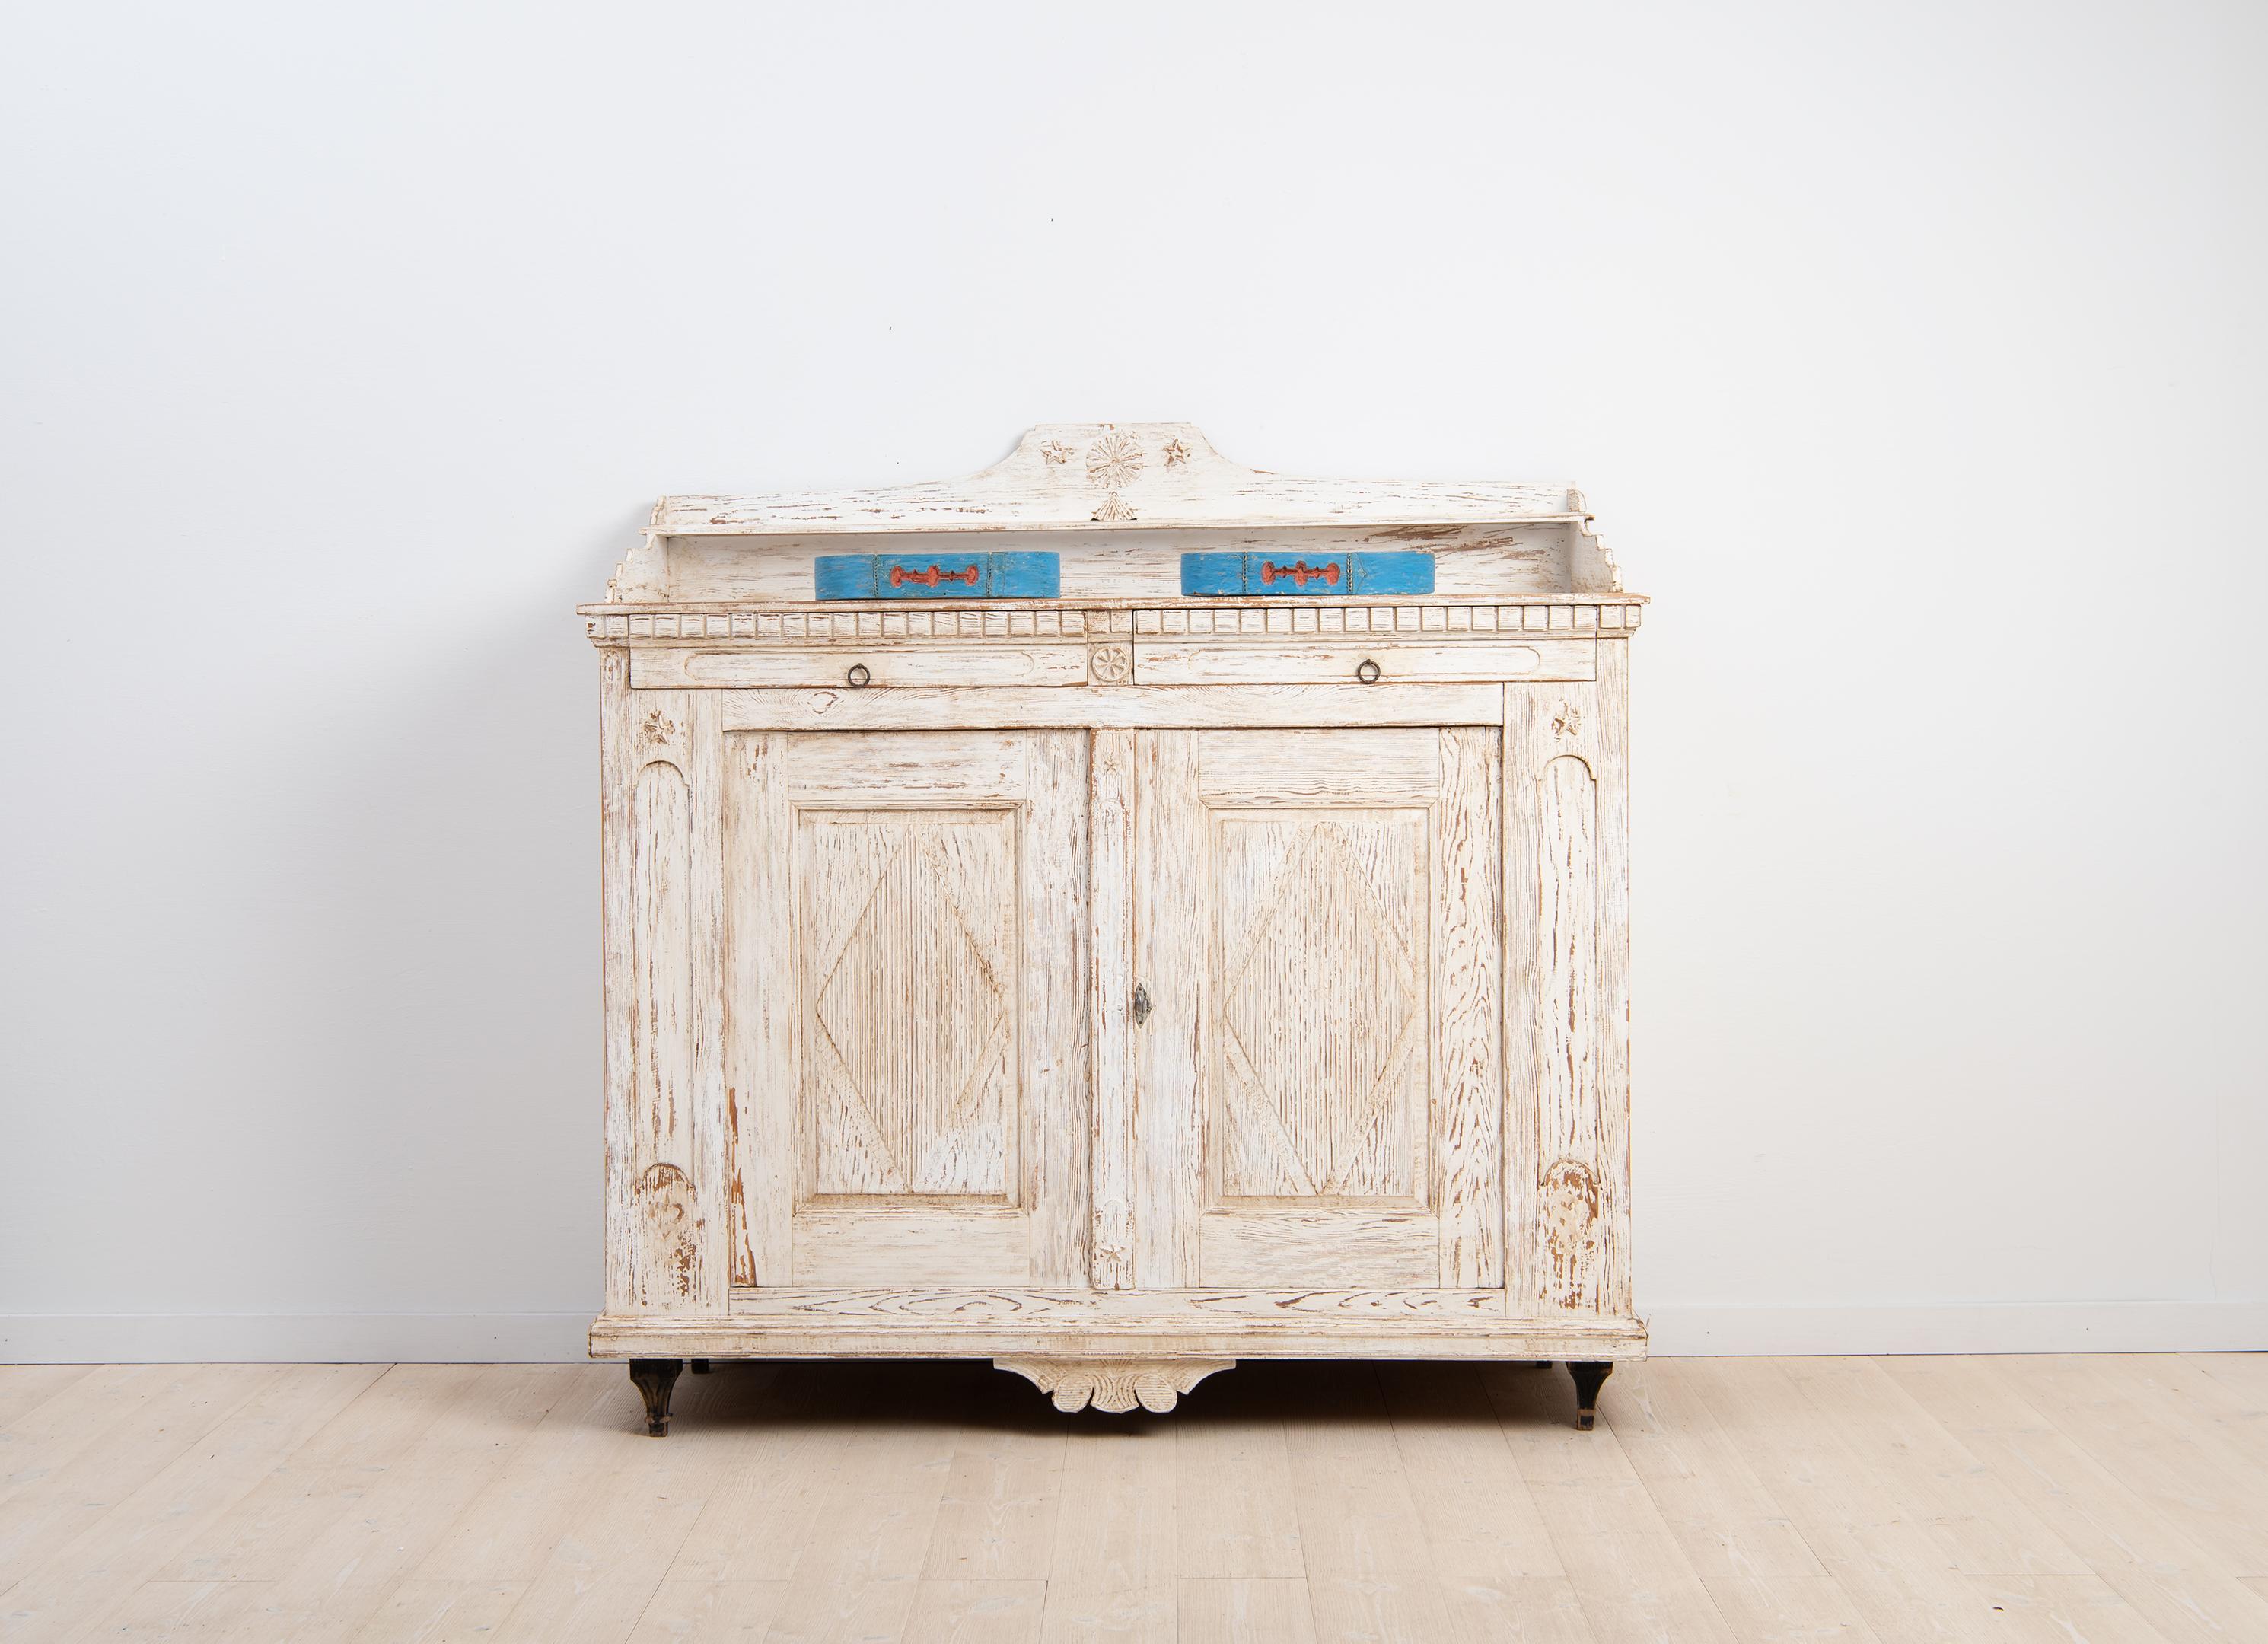 Neoclassical sideboard from Sidensjö in the Swedish province Ångermanland. The sideboard was made during the late 1700s and the material is Swedish pine. The paint is old and historic from the early 1900s and distressed with age. The lock and key